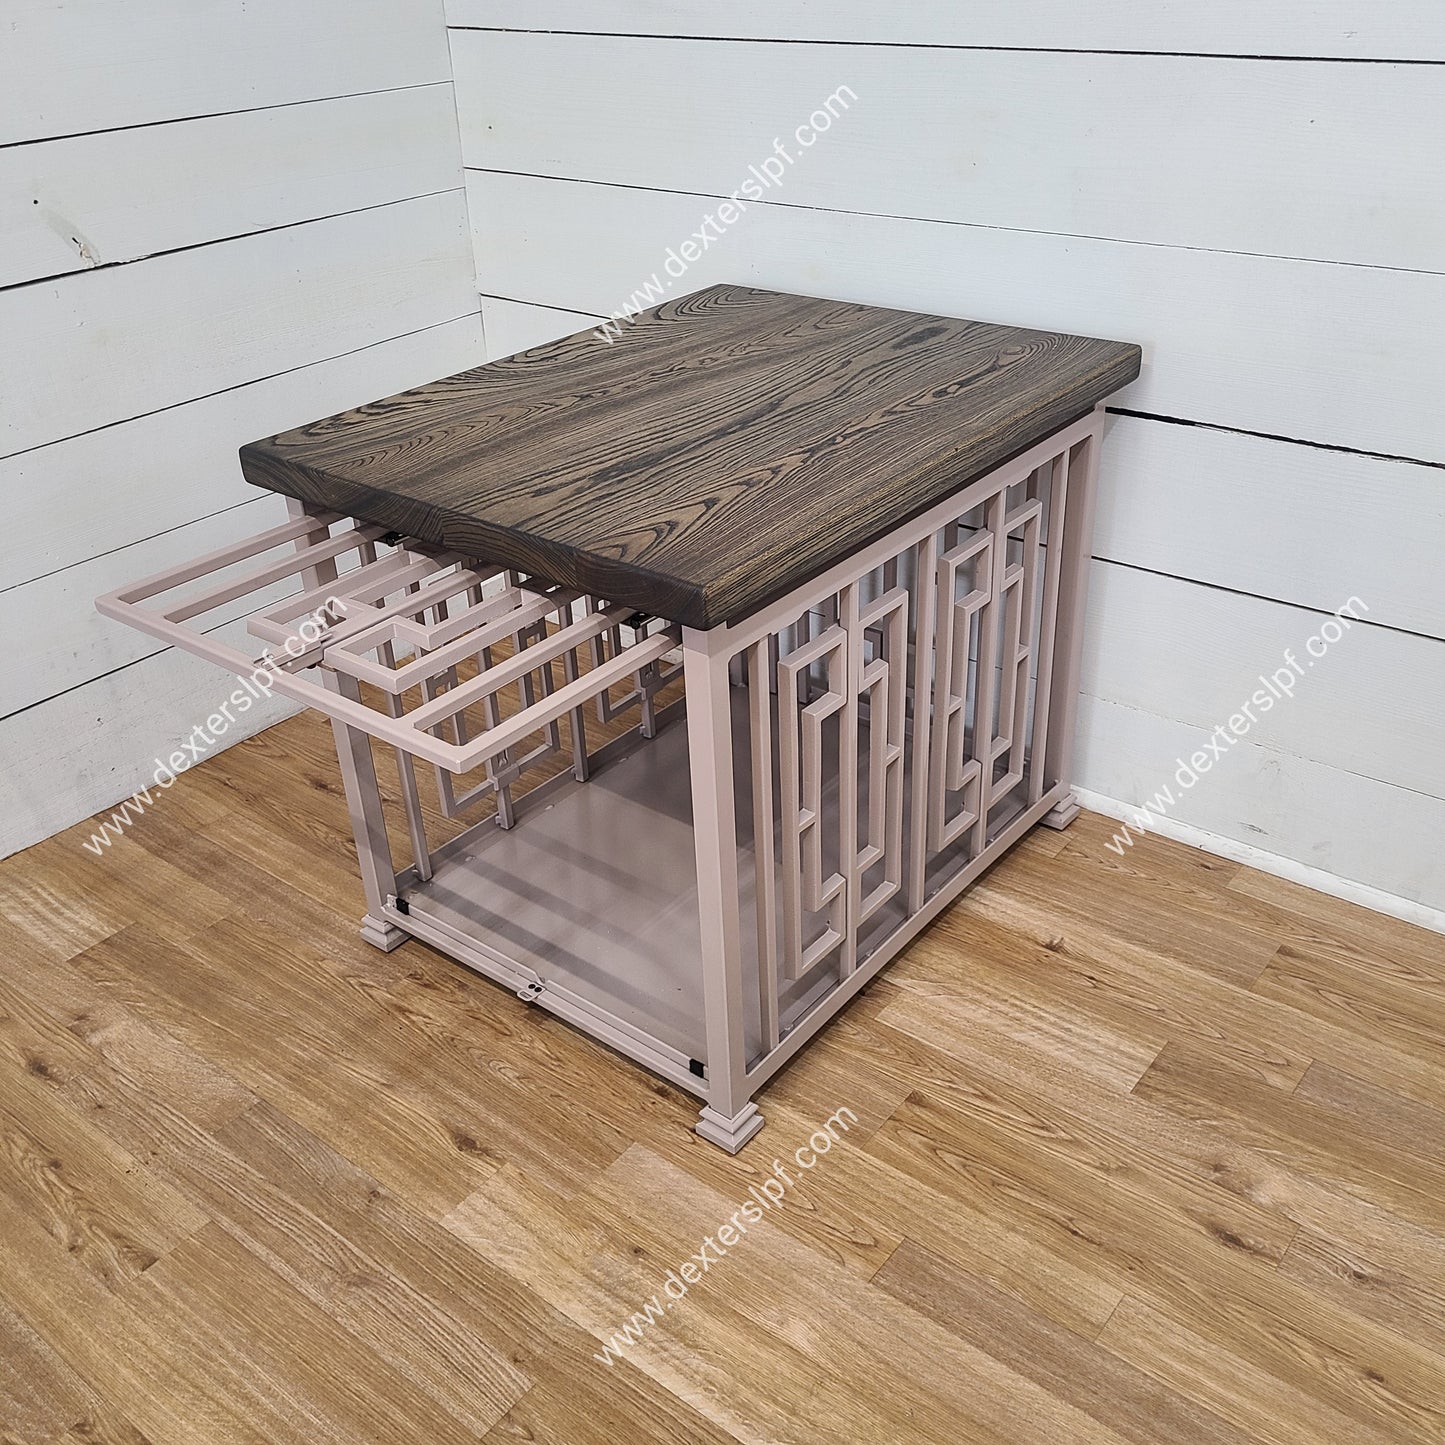 Layla Small Modern Dog Crate, Dog Crate Furniture, Dog Kennel Furniture, Dog Crate End Table, Dog Crate Table